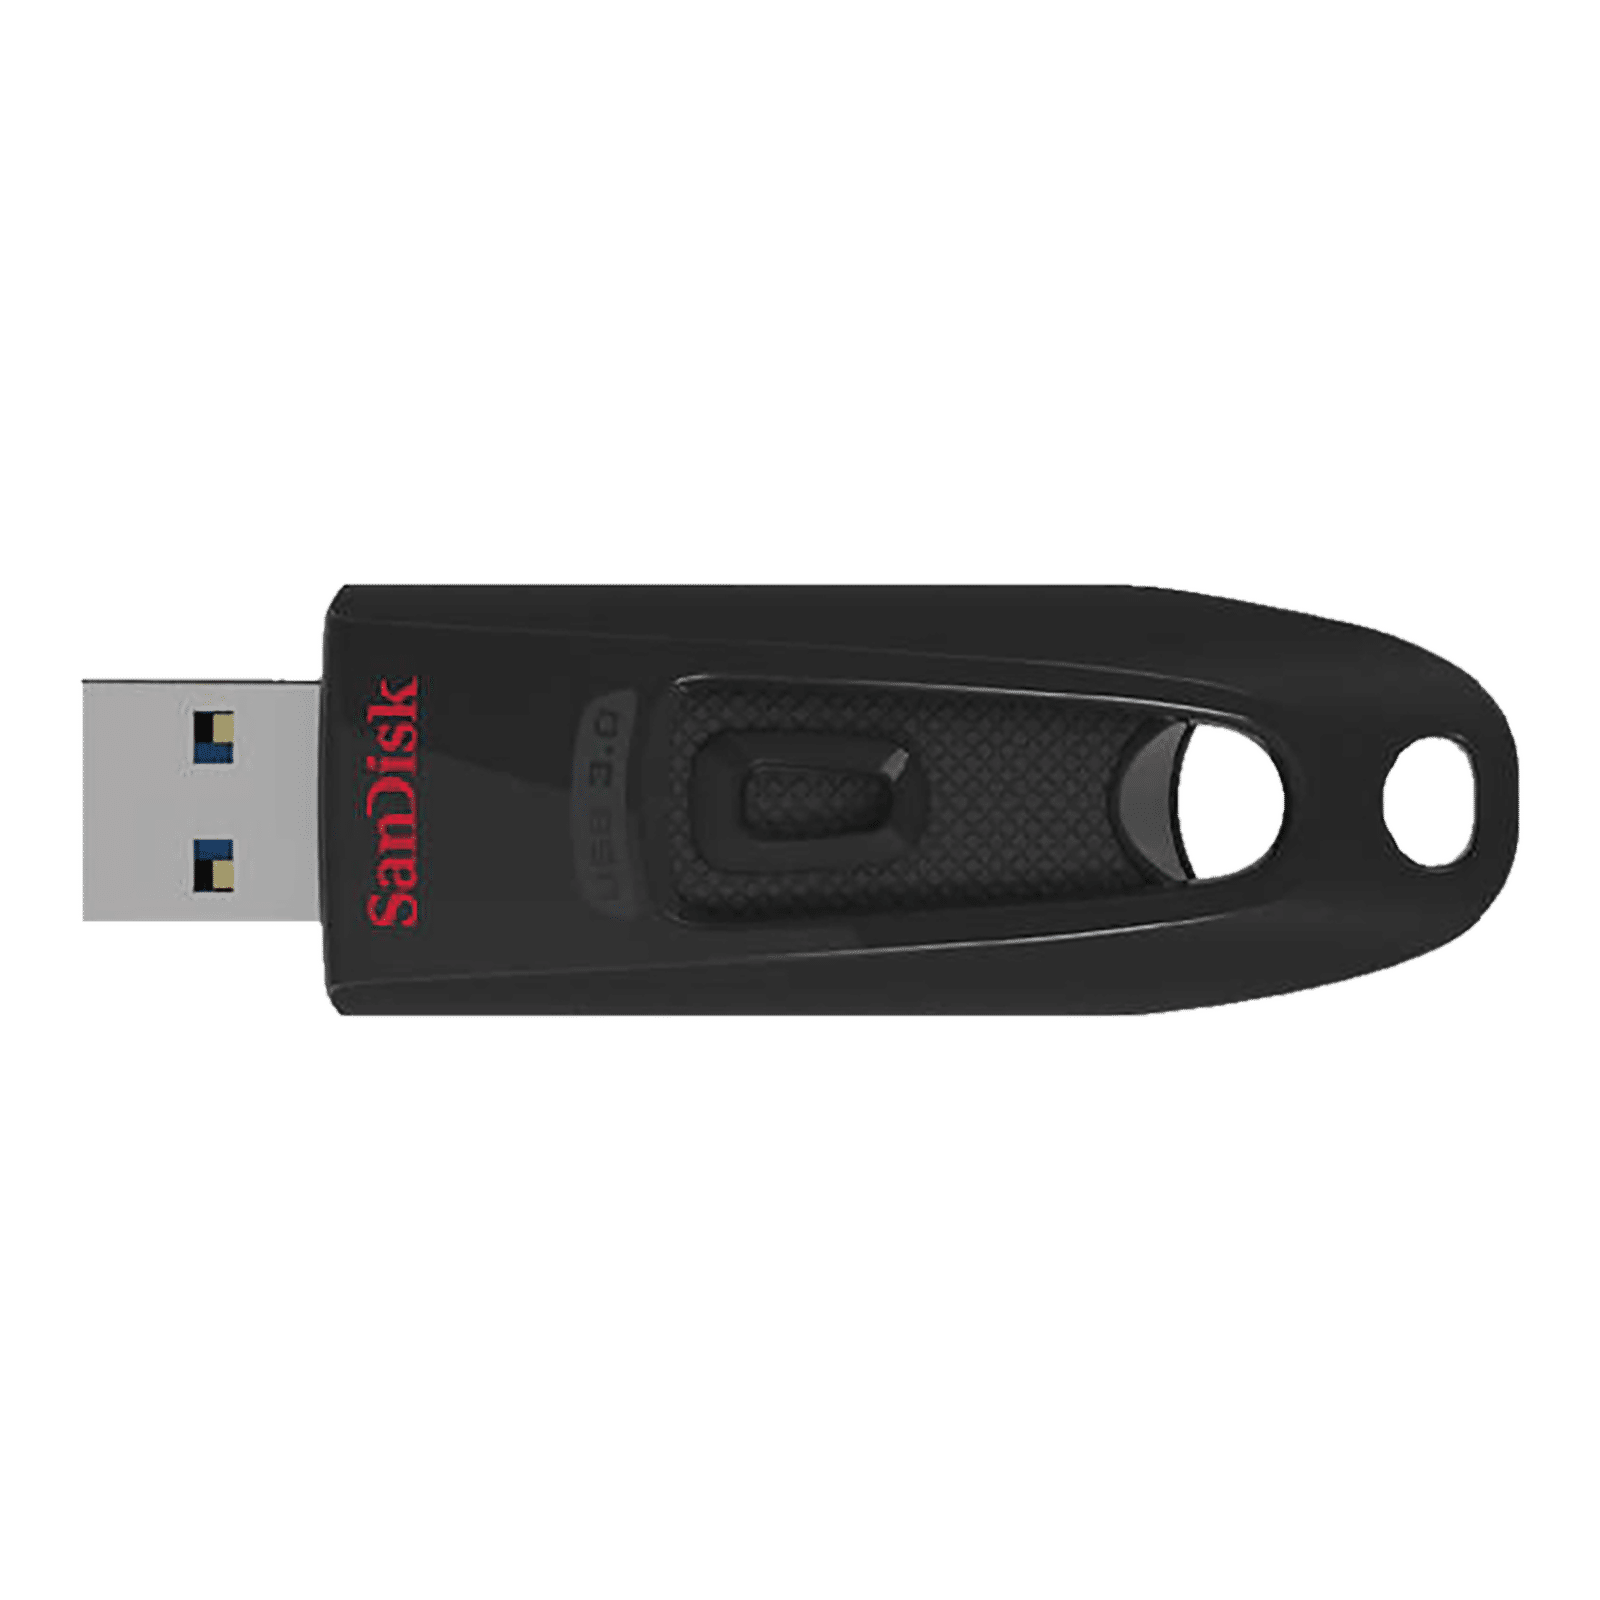 onn. USB 3.0 Flash Drive for Tablets and Computers, 64 GB Capacity